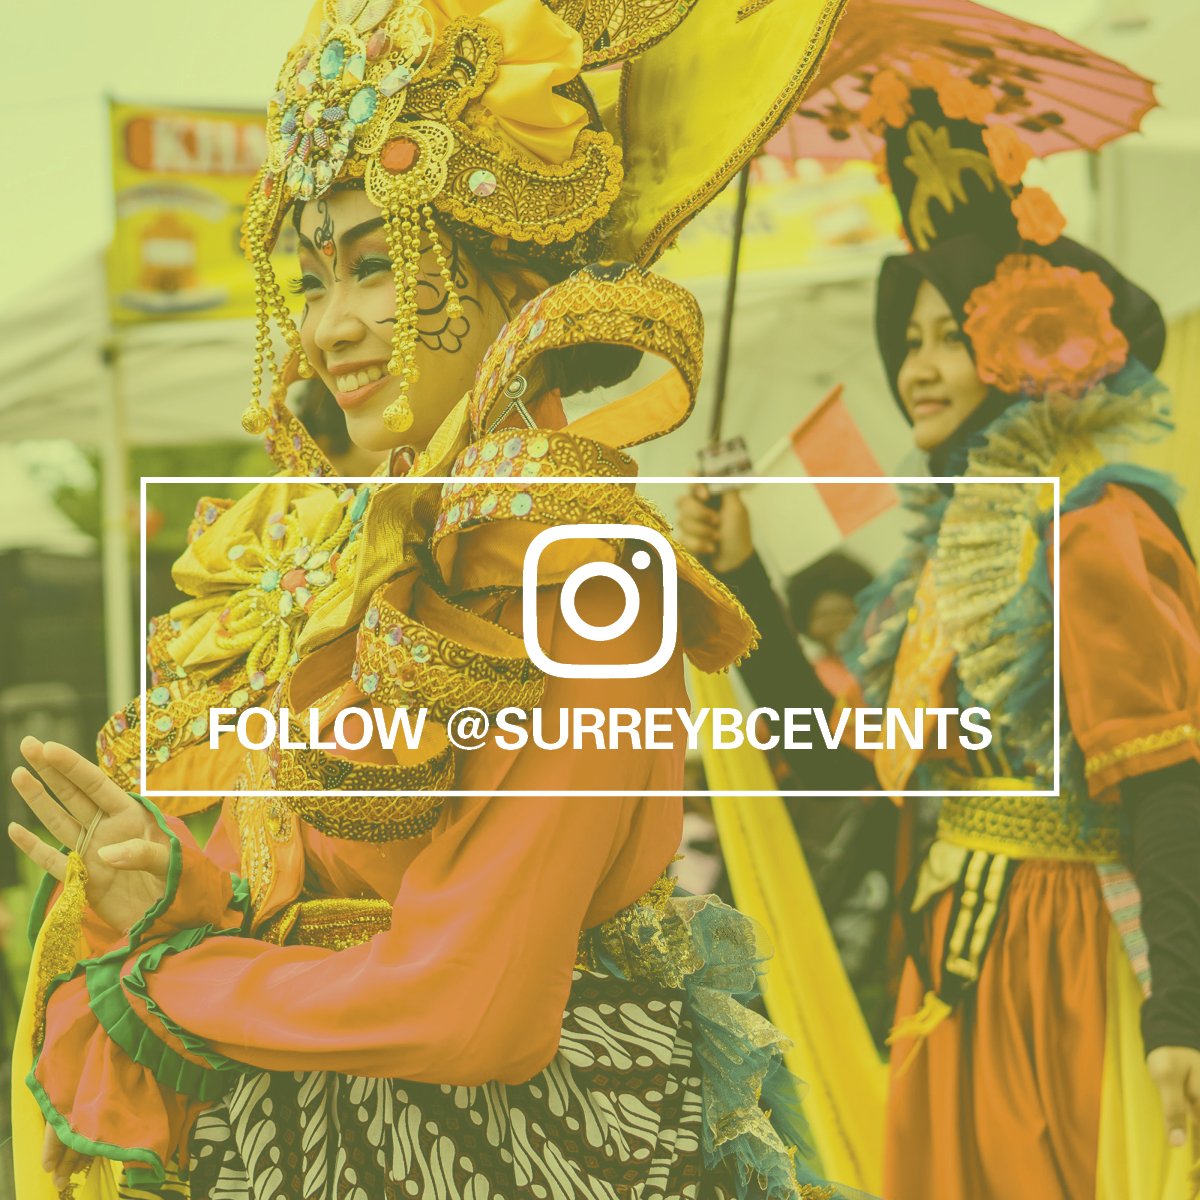 We're expanding! Follow our newly-created #Instagram account @surreybcevents for the latest #festival updates! https://t.co/R8OCmQ0cPw